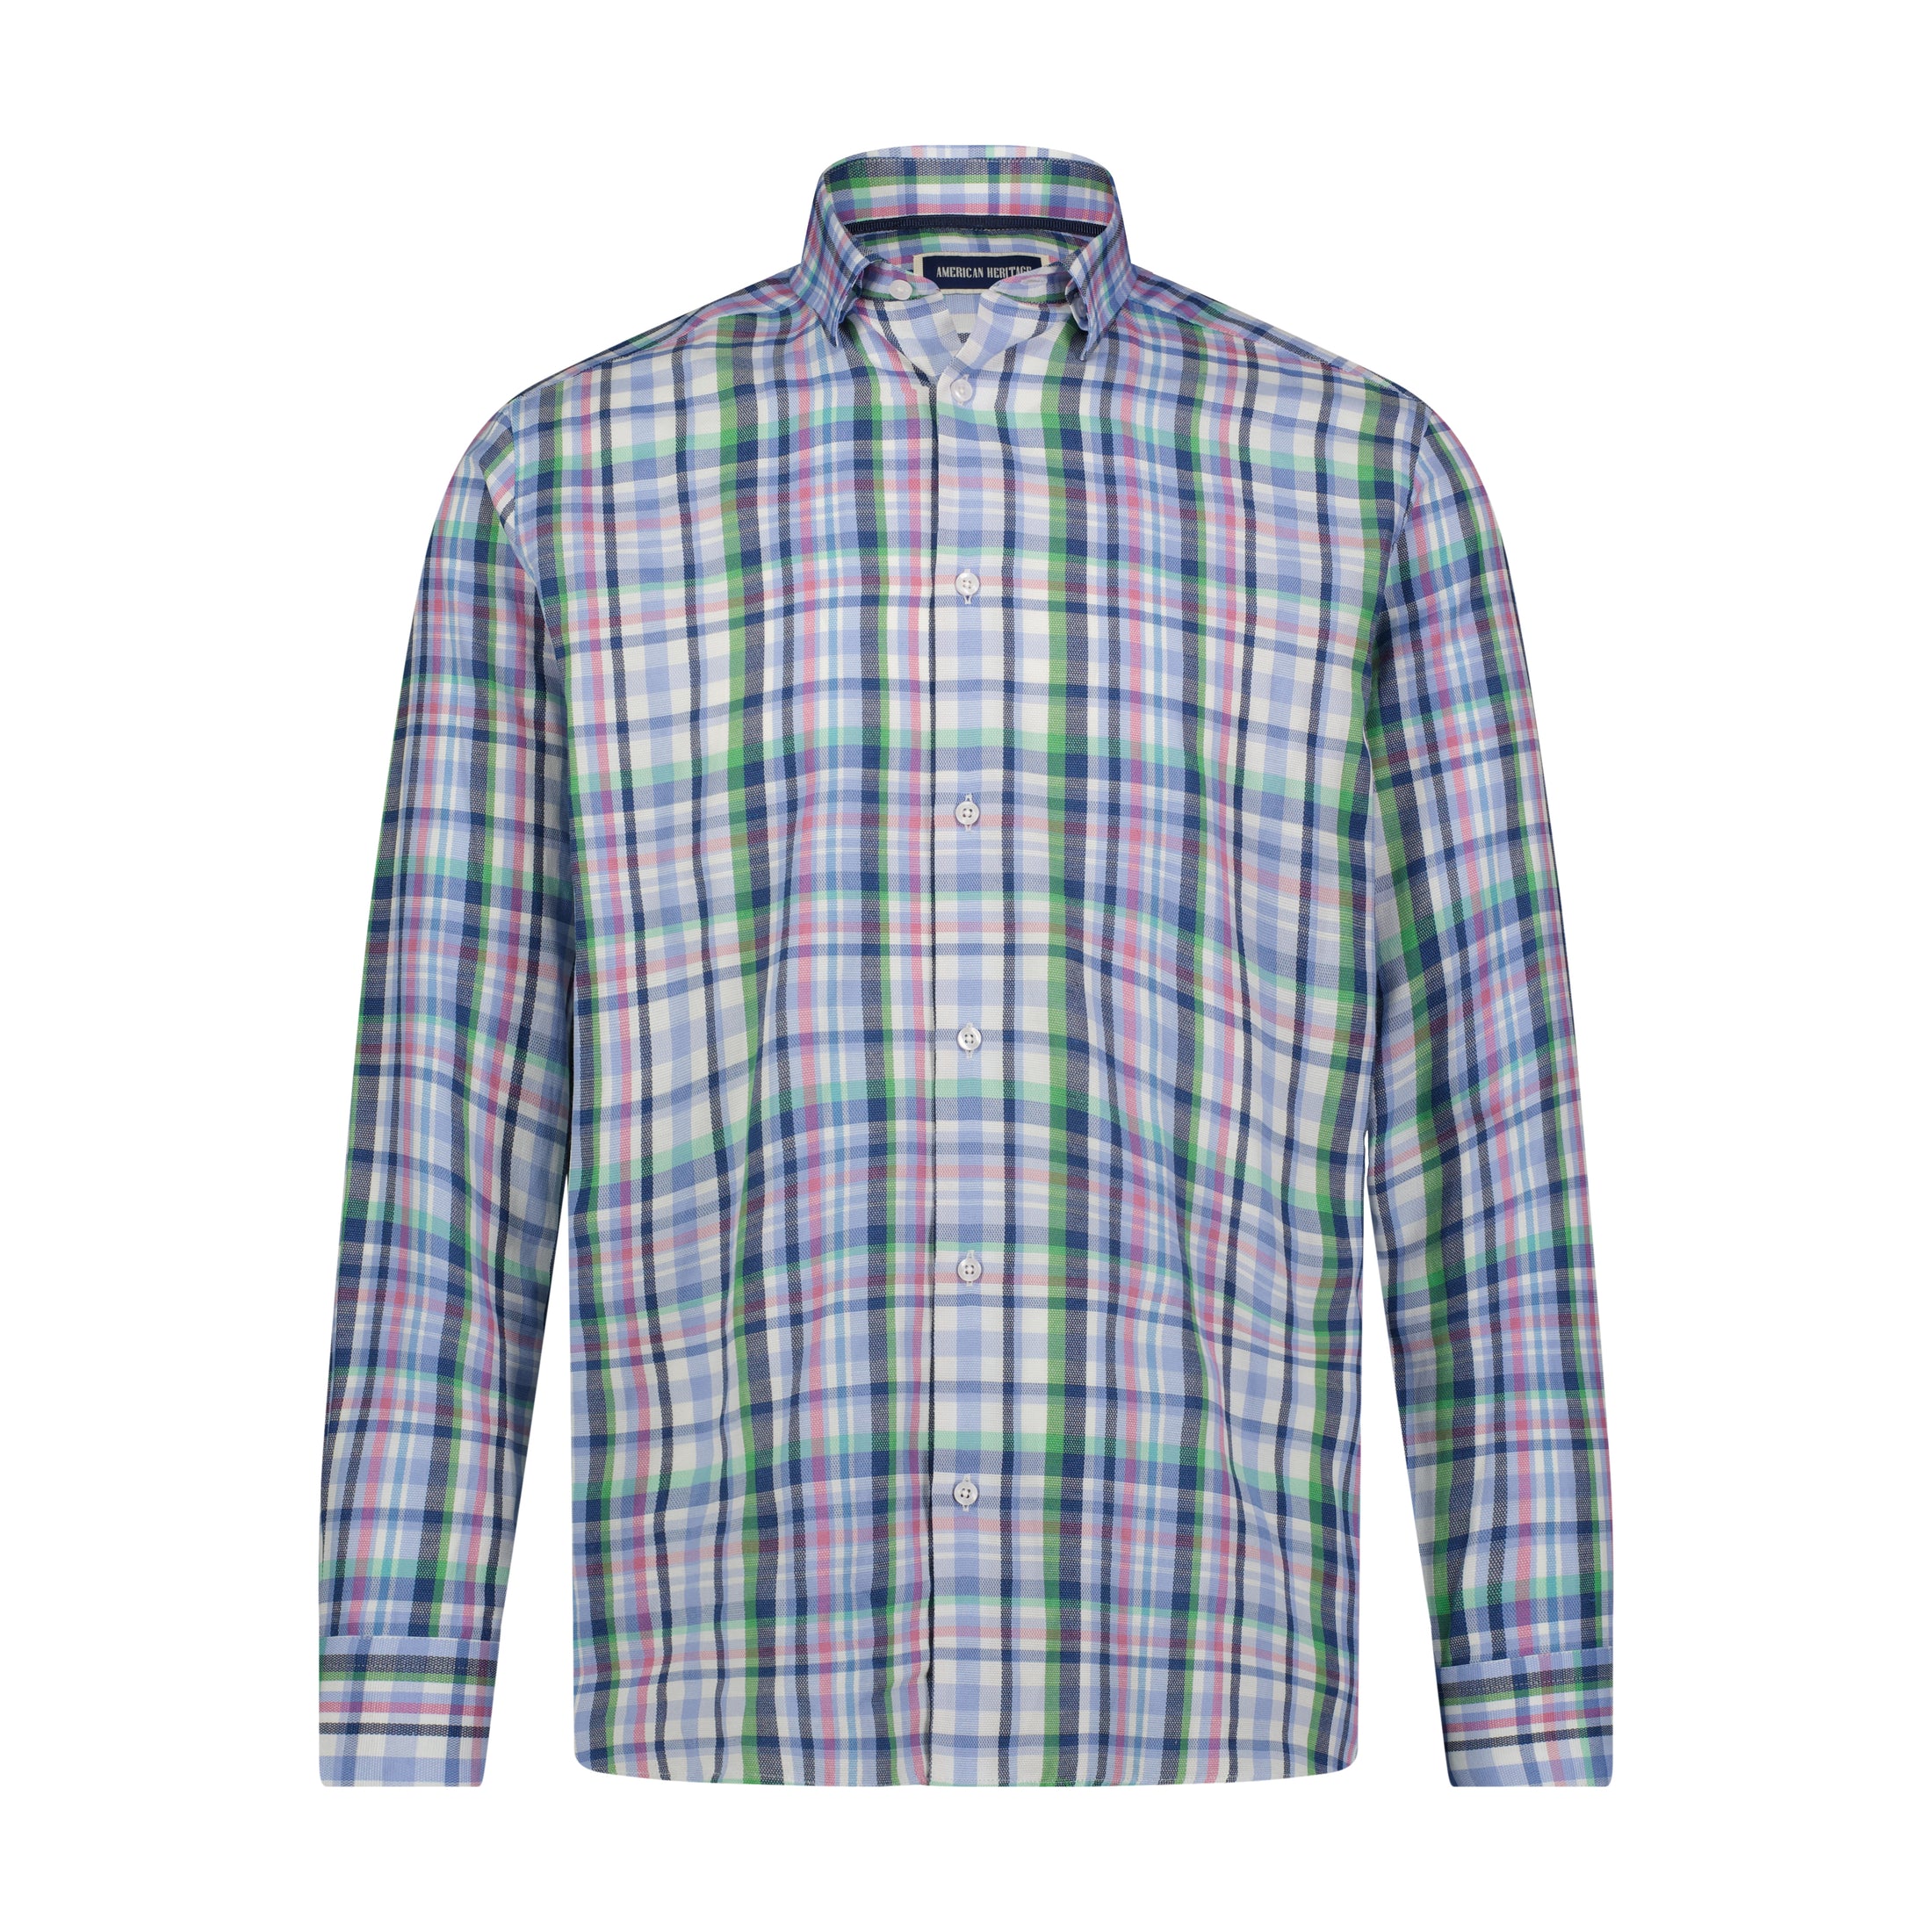 Purple Navy White and Green Plaid Oxford Long Sleeve Shirt